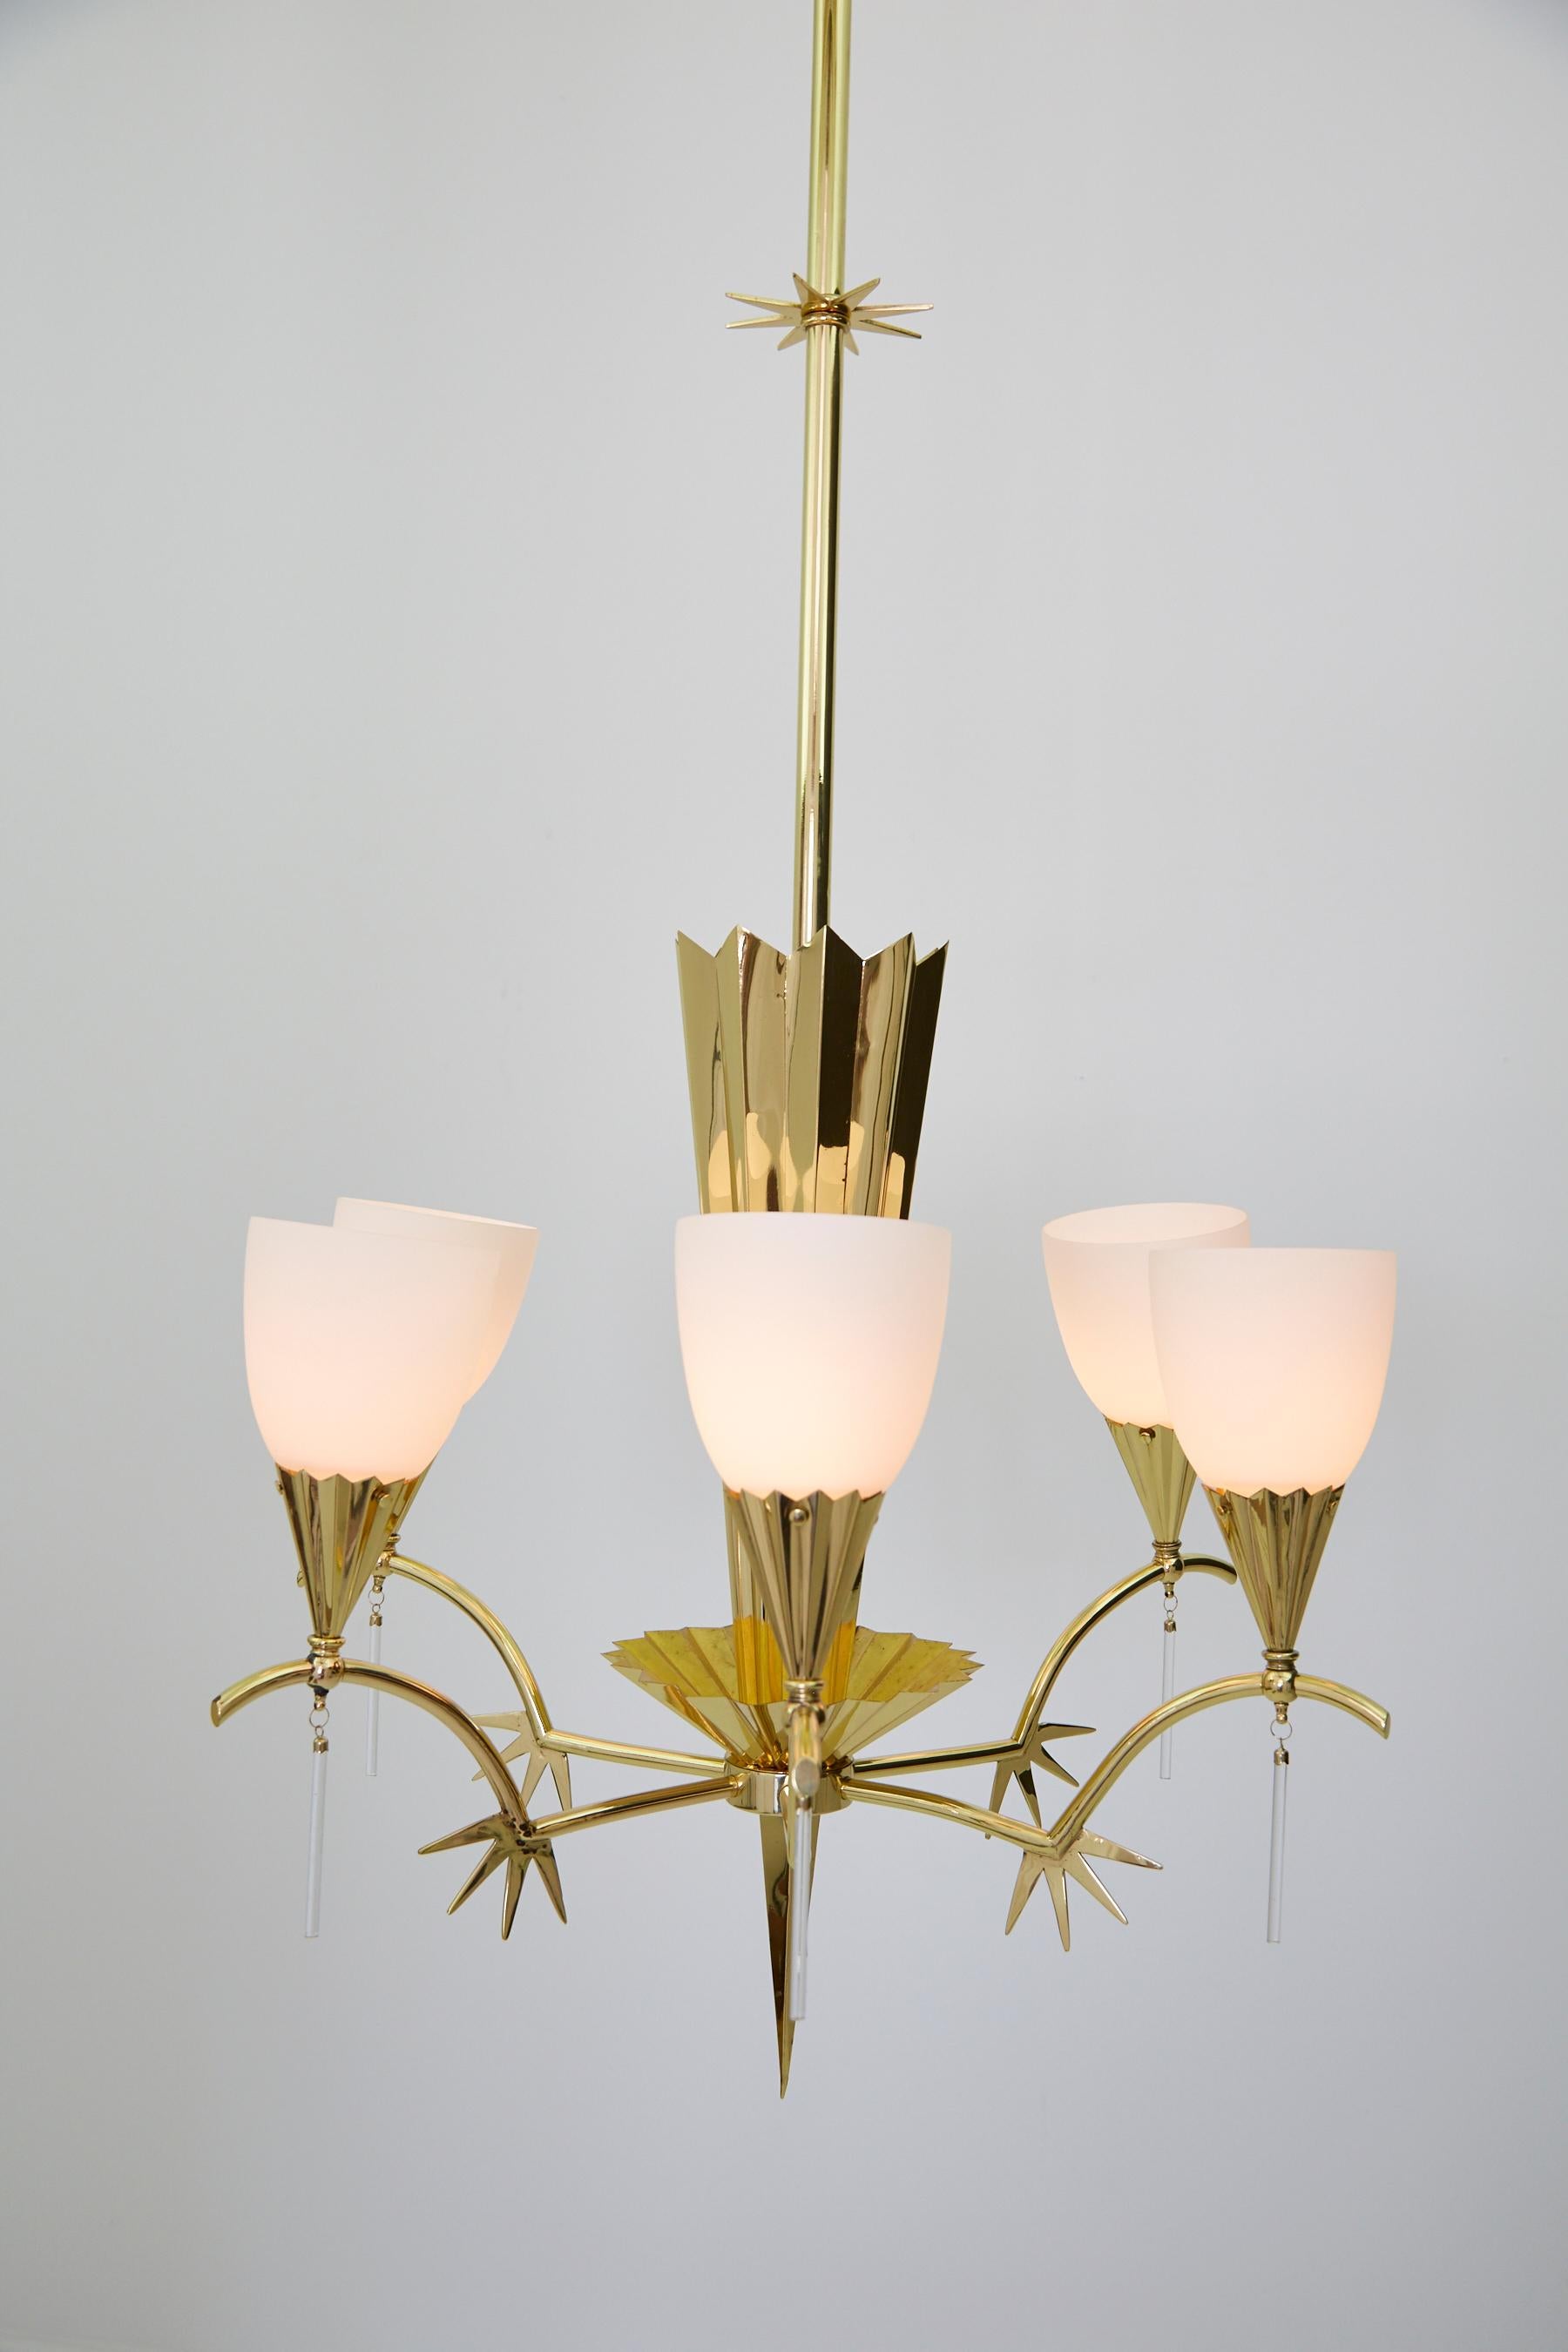 Six-armed Italian brass chandelier with frosted shades and clear glass pendants. Long central brass shaft with trefoil hook at top, extending down to a decorative star shape halfway down. Body of chandelier is comprised of an elongated crown shape